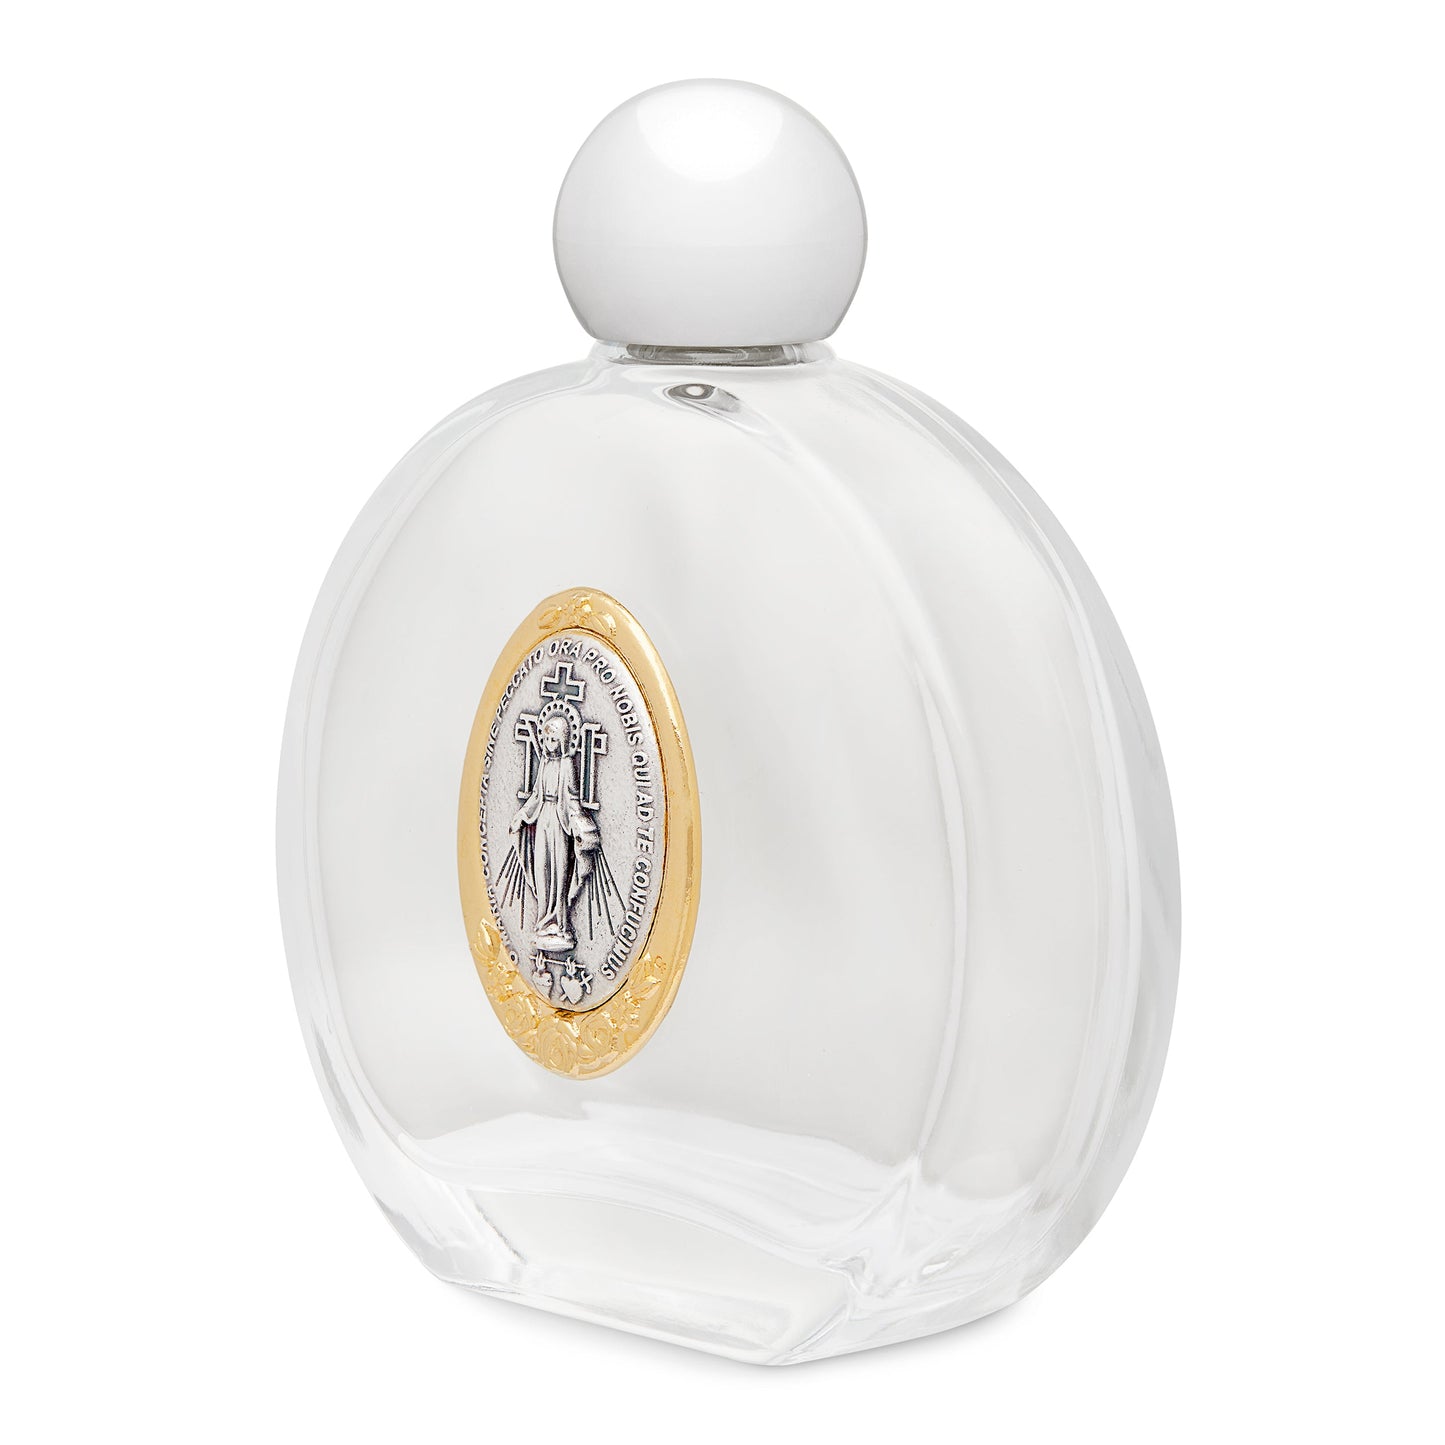 MONDO CATTOLICO Bottle of 100 ml. with the Miraculous Virgin